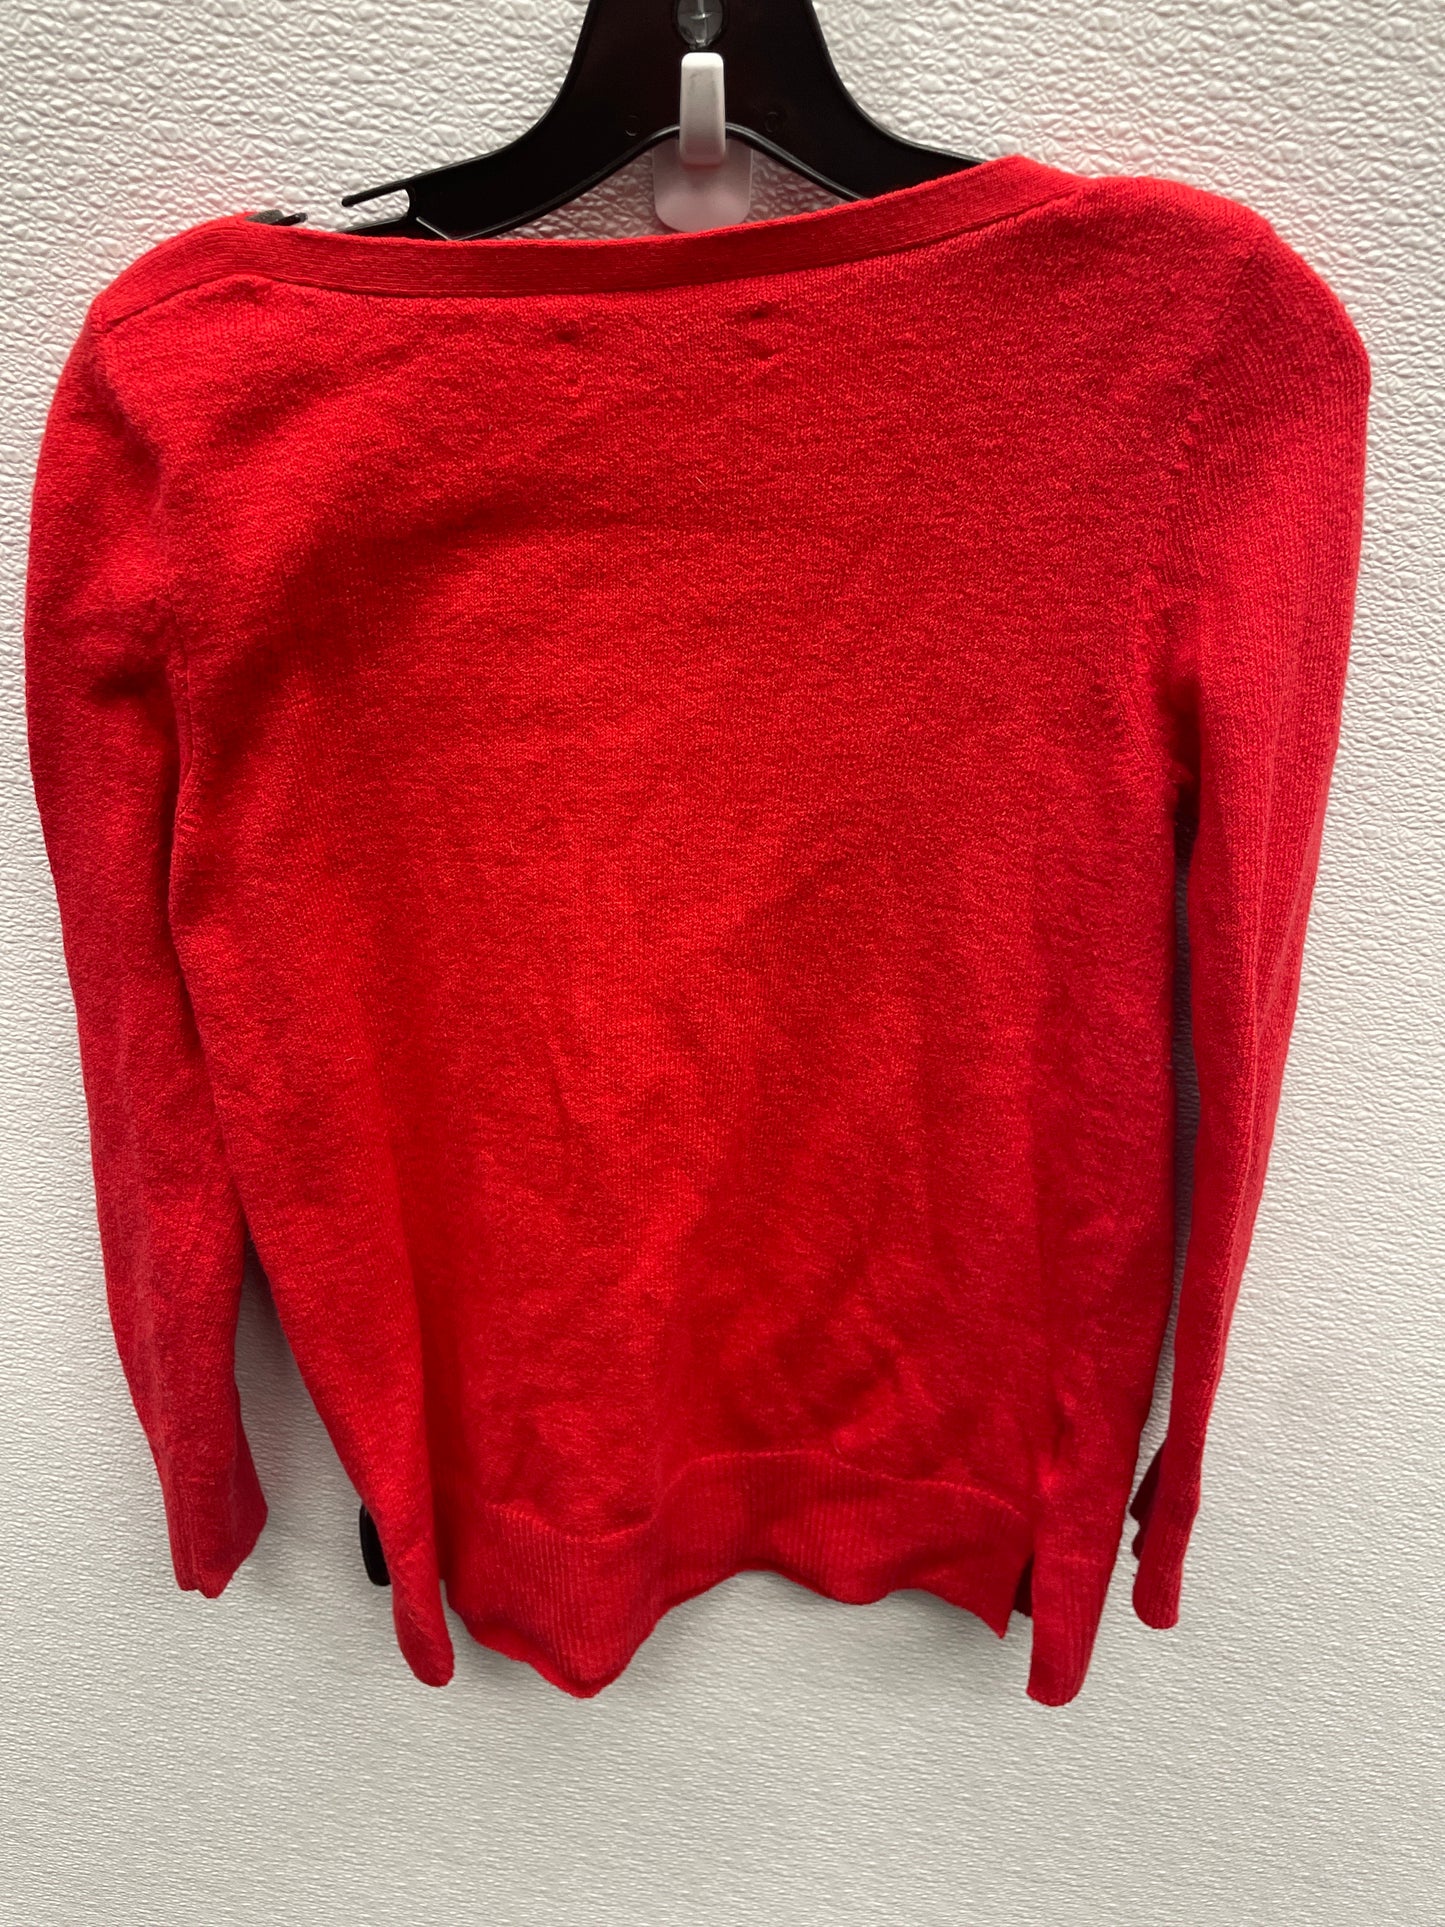 Sweater By Ann Taylor O  Size: Petite   Small